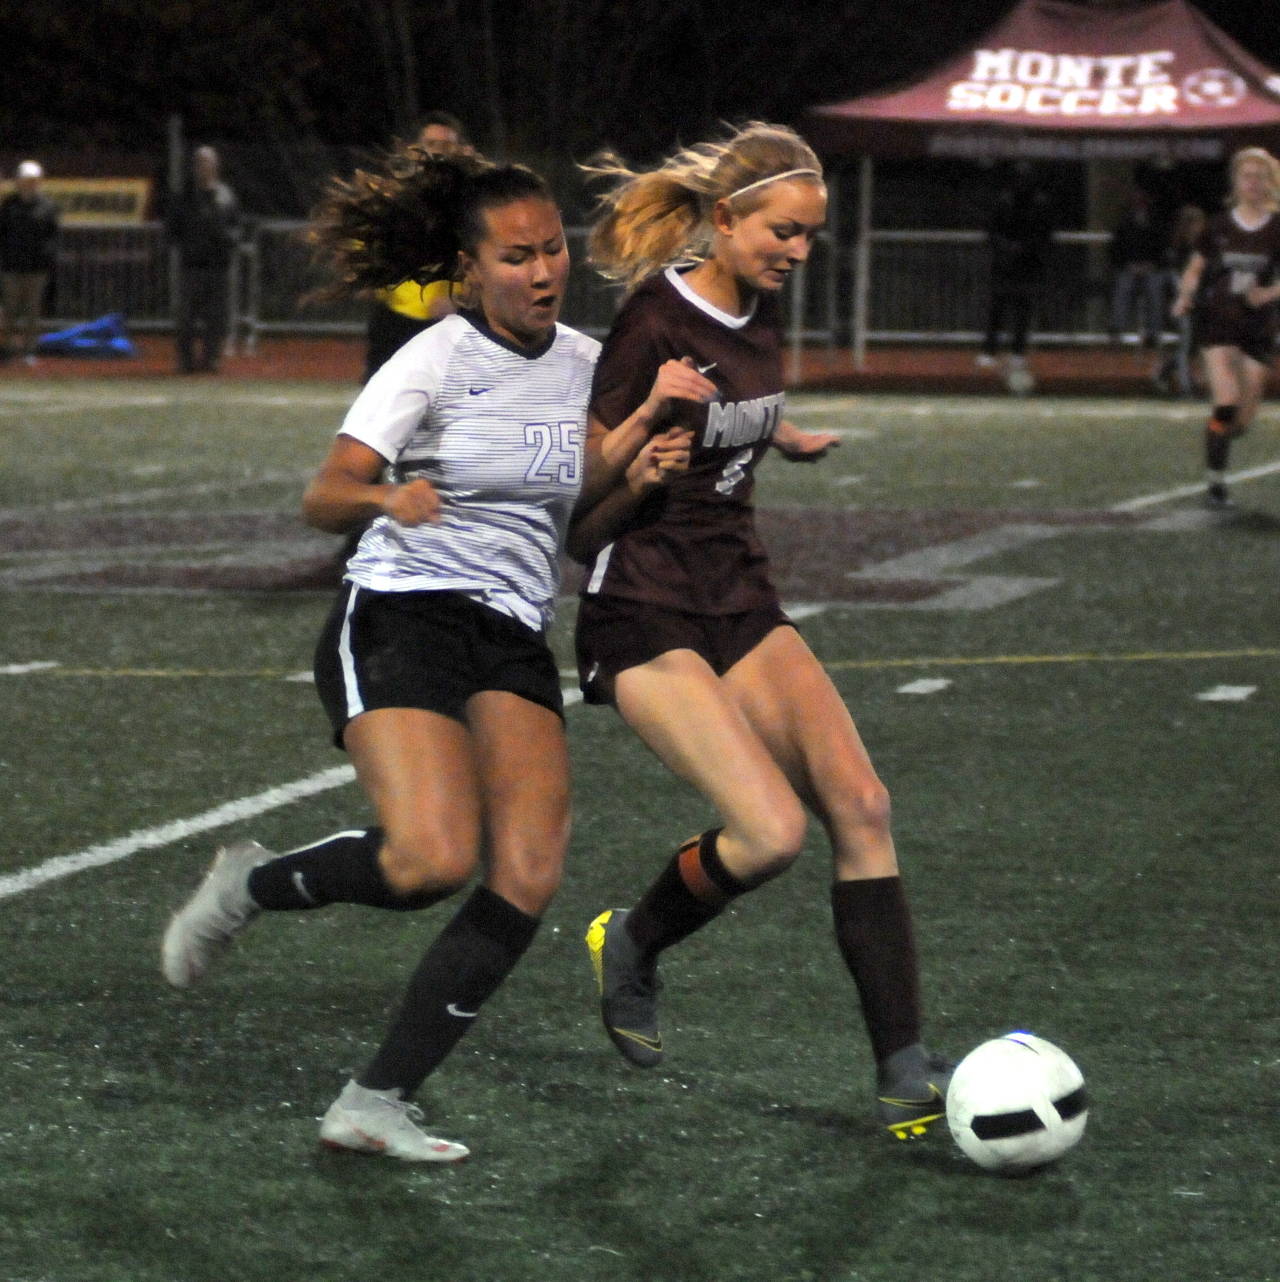 Montesano forward Anna Ayres, right, holds possession against The Bush School’s Claudia Abram during the Bulldogs’ 2-1 loss against the Blazers in a 1A State Tournament game on Wednesday at Montesano High School. (Ryan Sparks | Grays Harbor News Group)